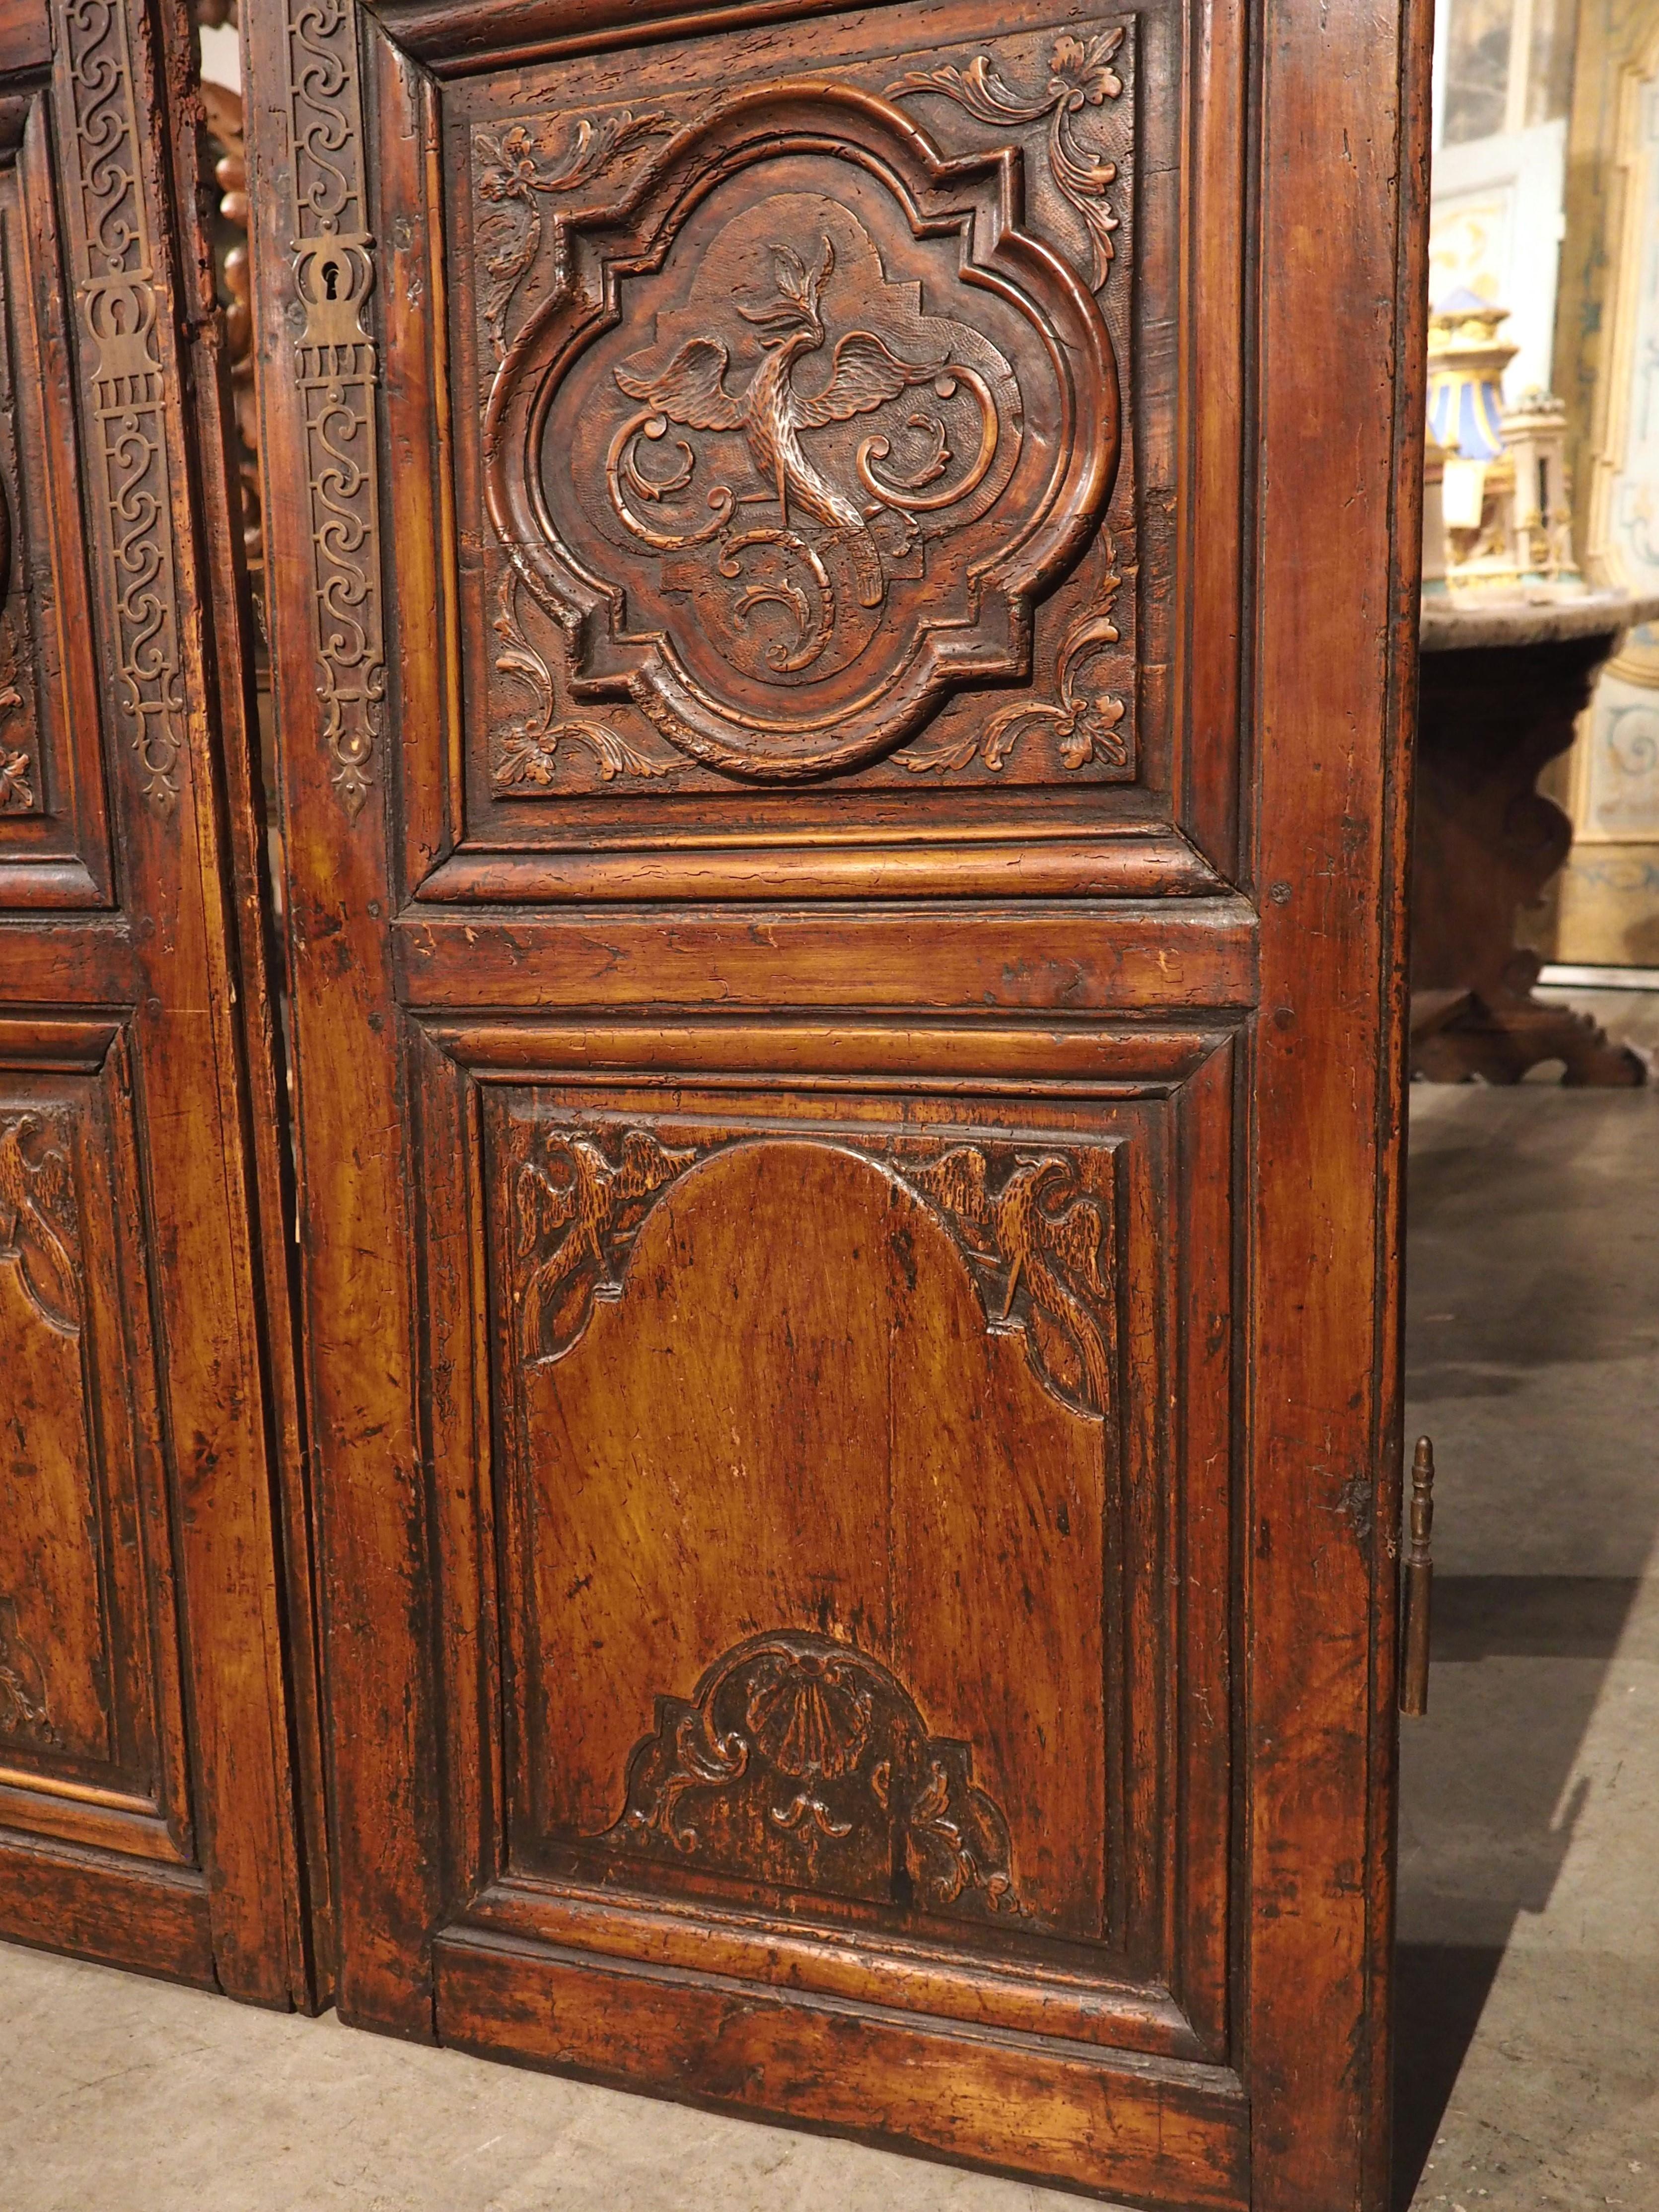 Pair of Antique Cherry Wood Armoire Doors from Rennes, France, Circa 1720 13